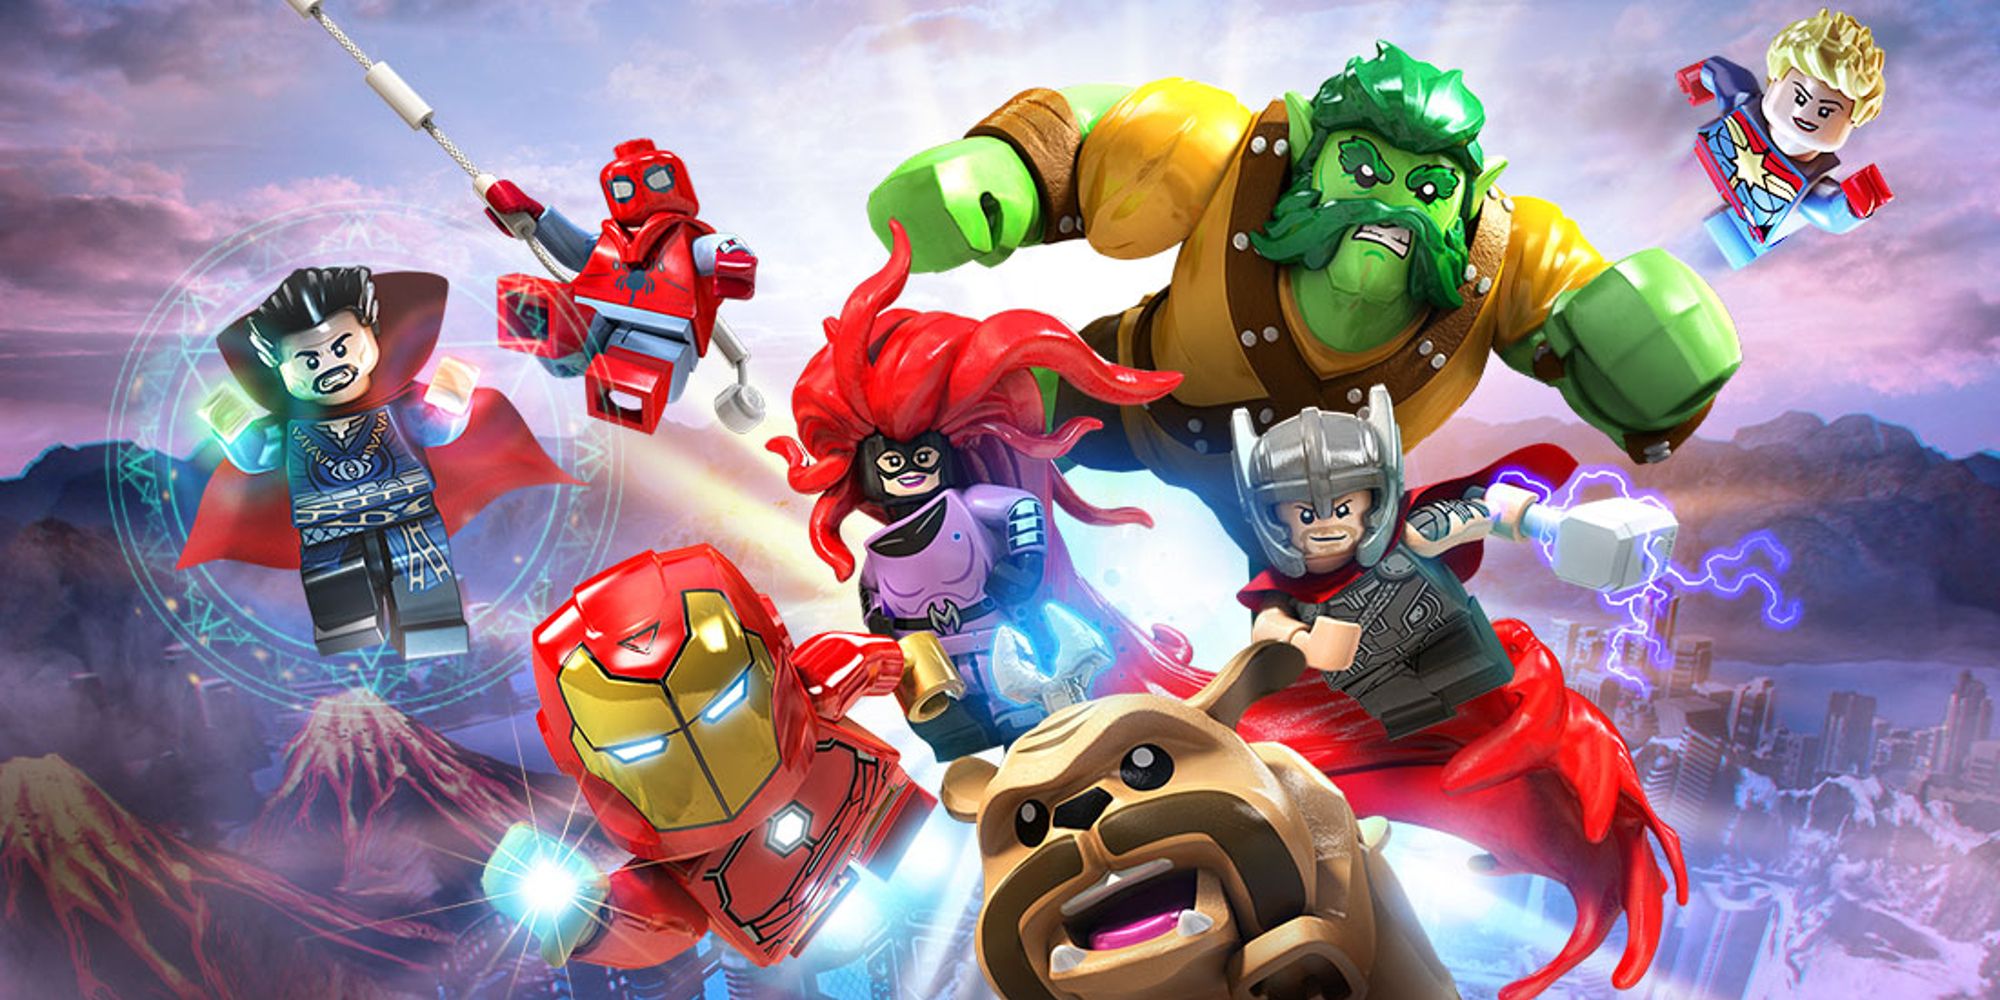 Heroes flying into action in LEGO Marvel Super Heroes 2